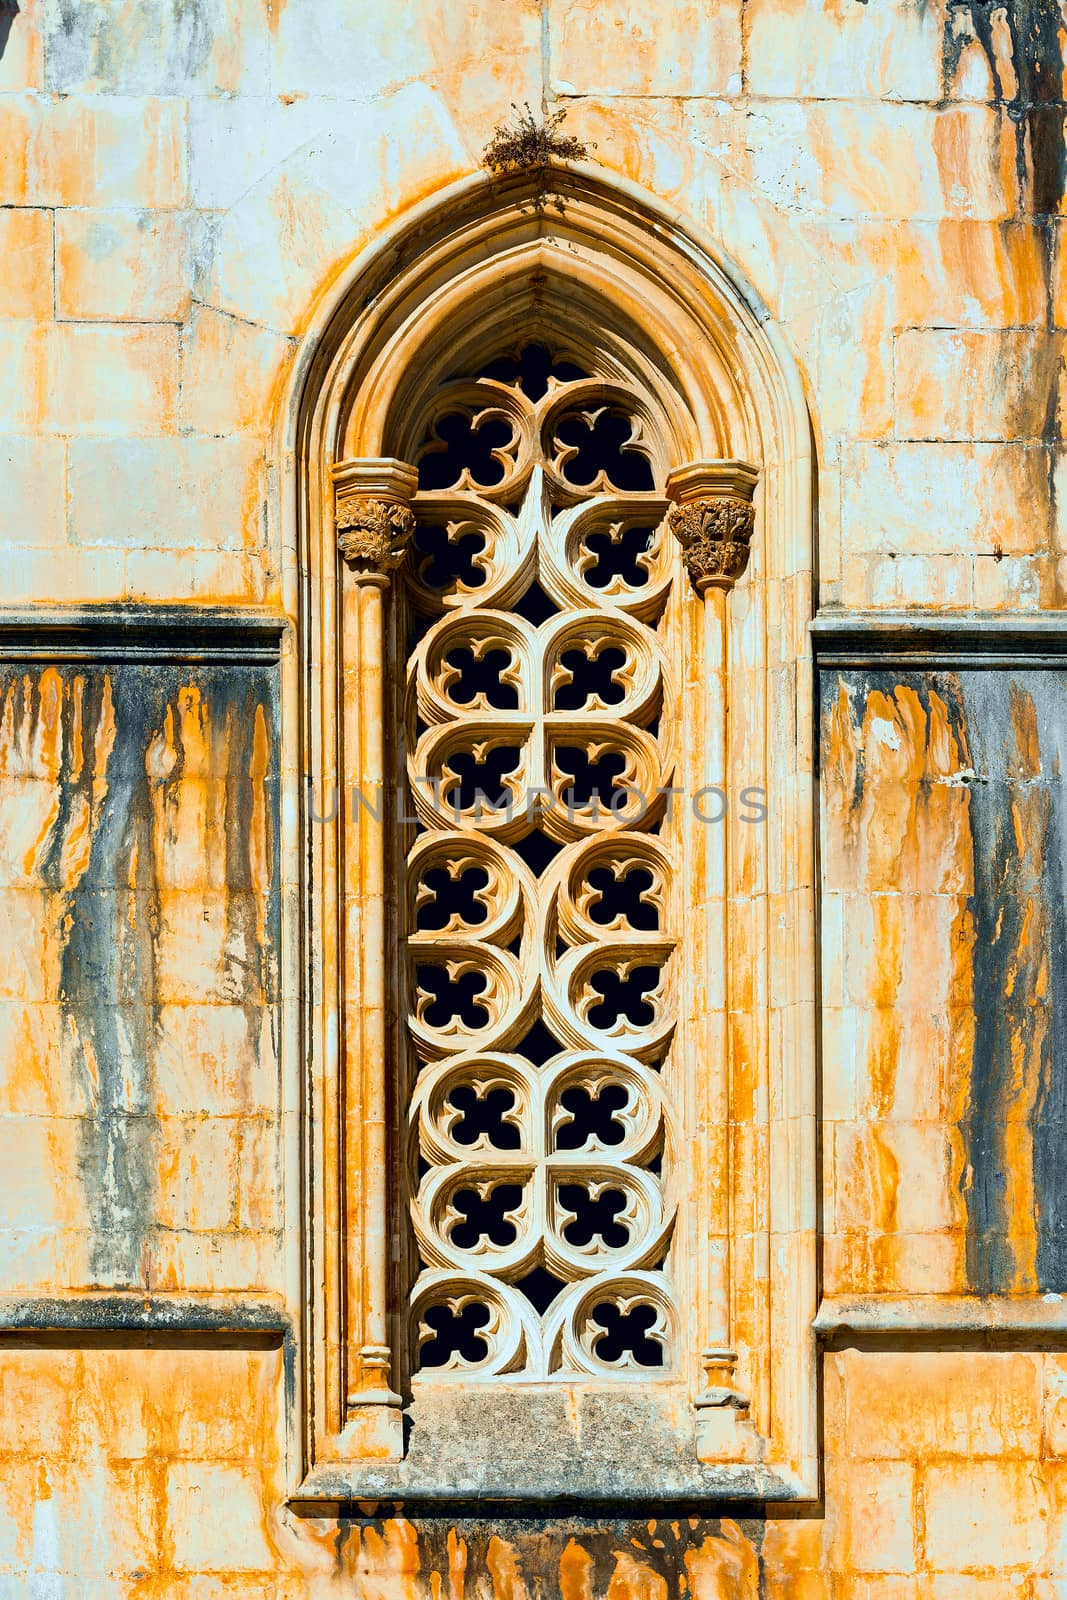 Window of the Church in Portugal